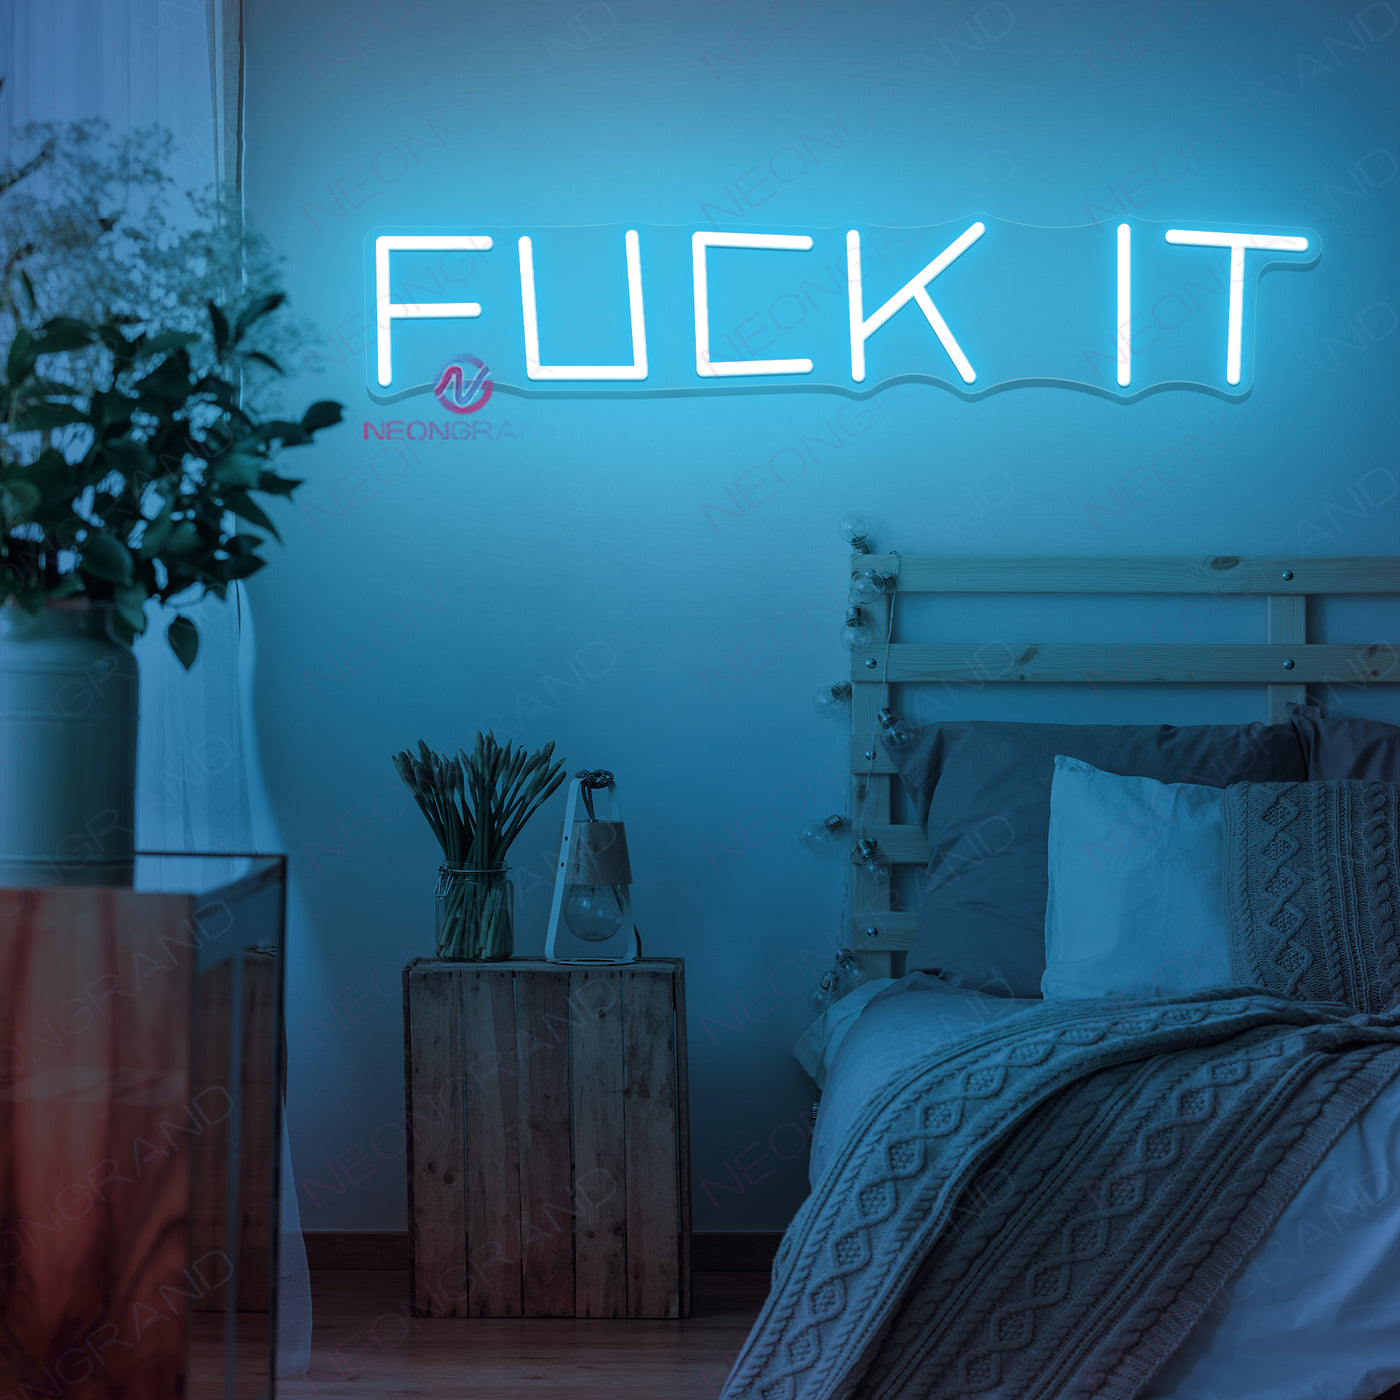 Fuck It Neon Sign Led Light Man Cave Neon Signs sky blue